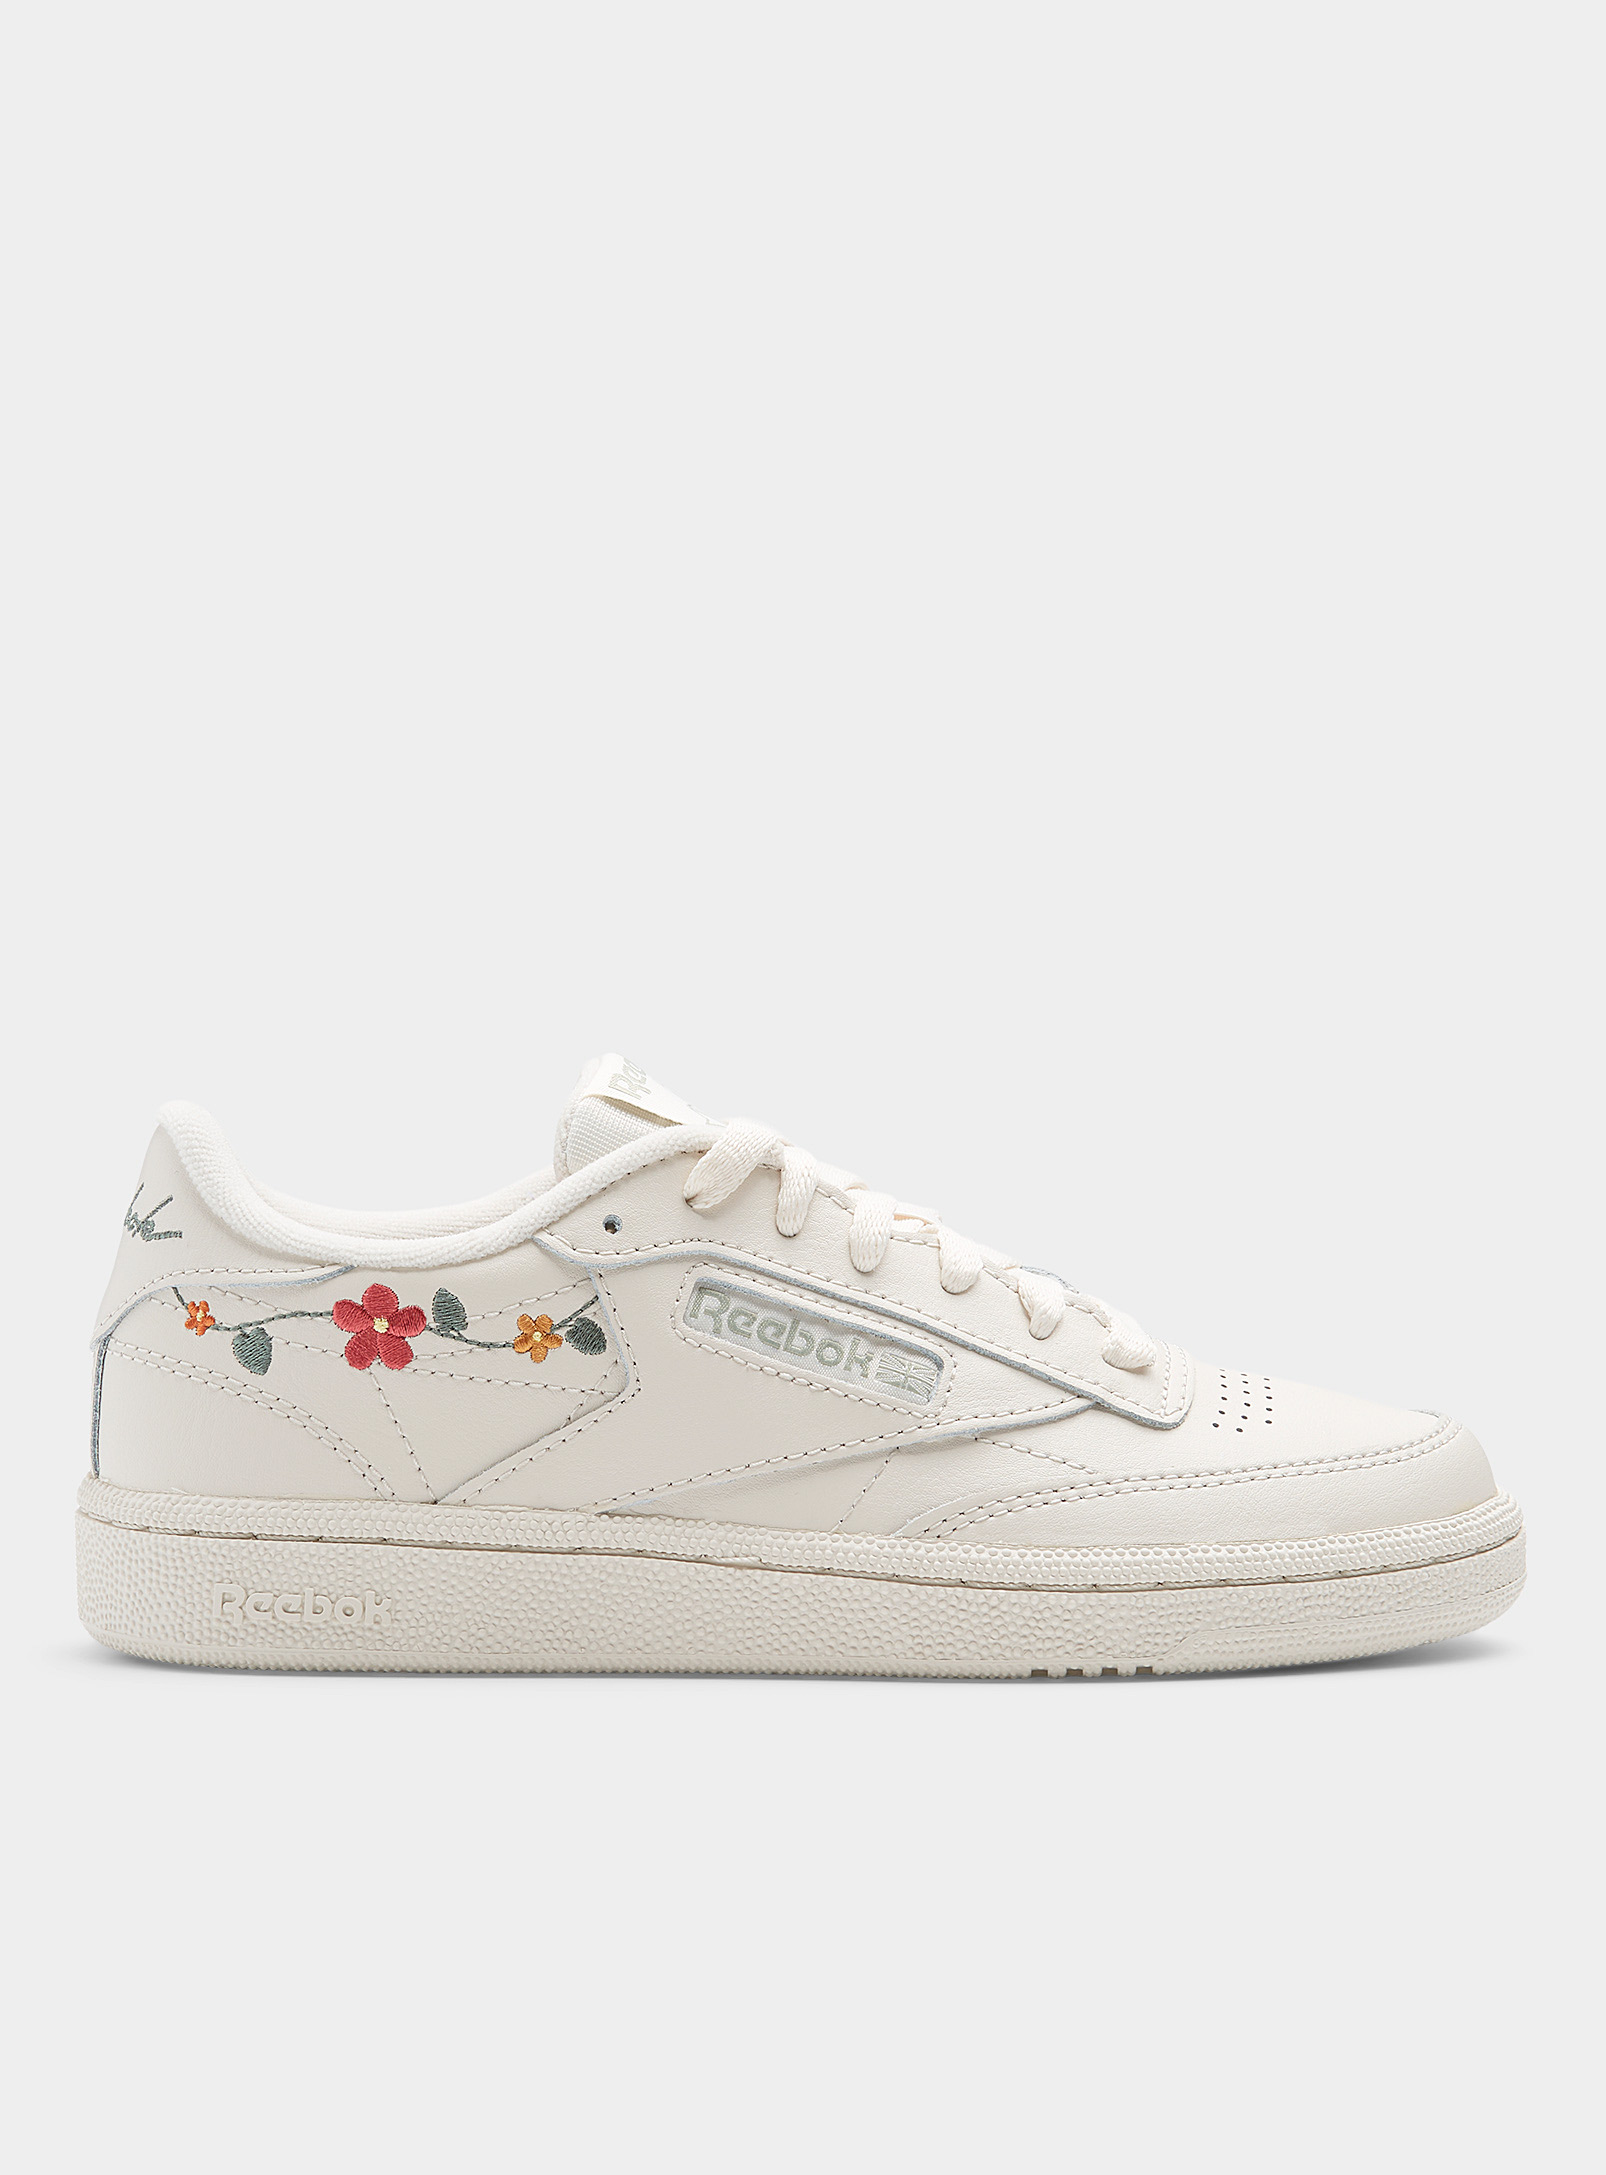 Reebok Classic Club C 85 Embroidered Daisies Sneakers Women In Ivory White